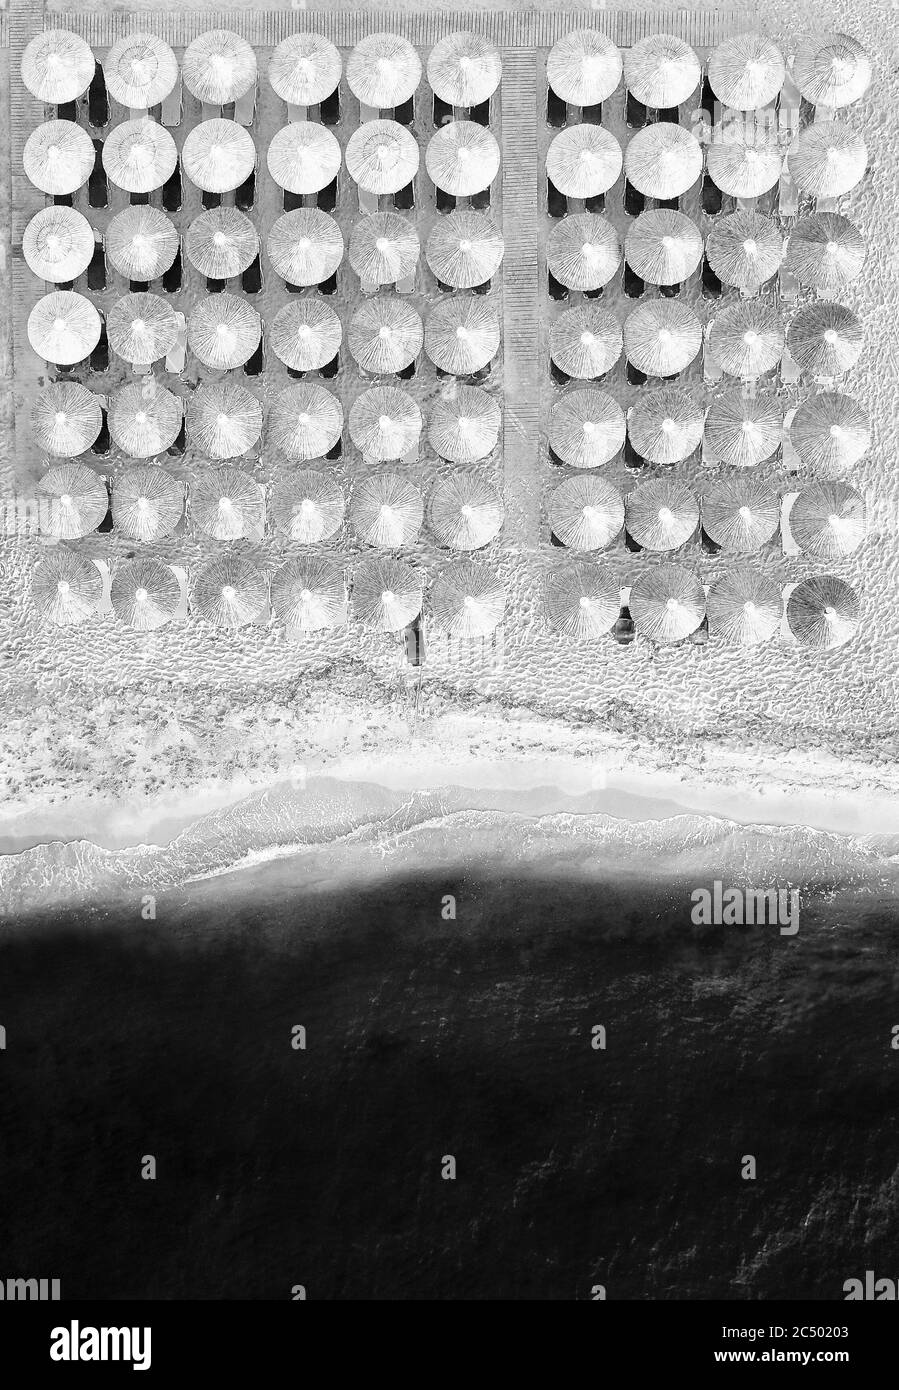 Beach from above people aerial Black and White Stock Photos & Images ...